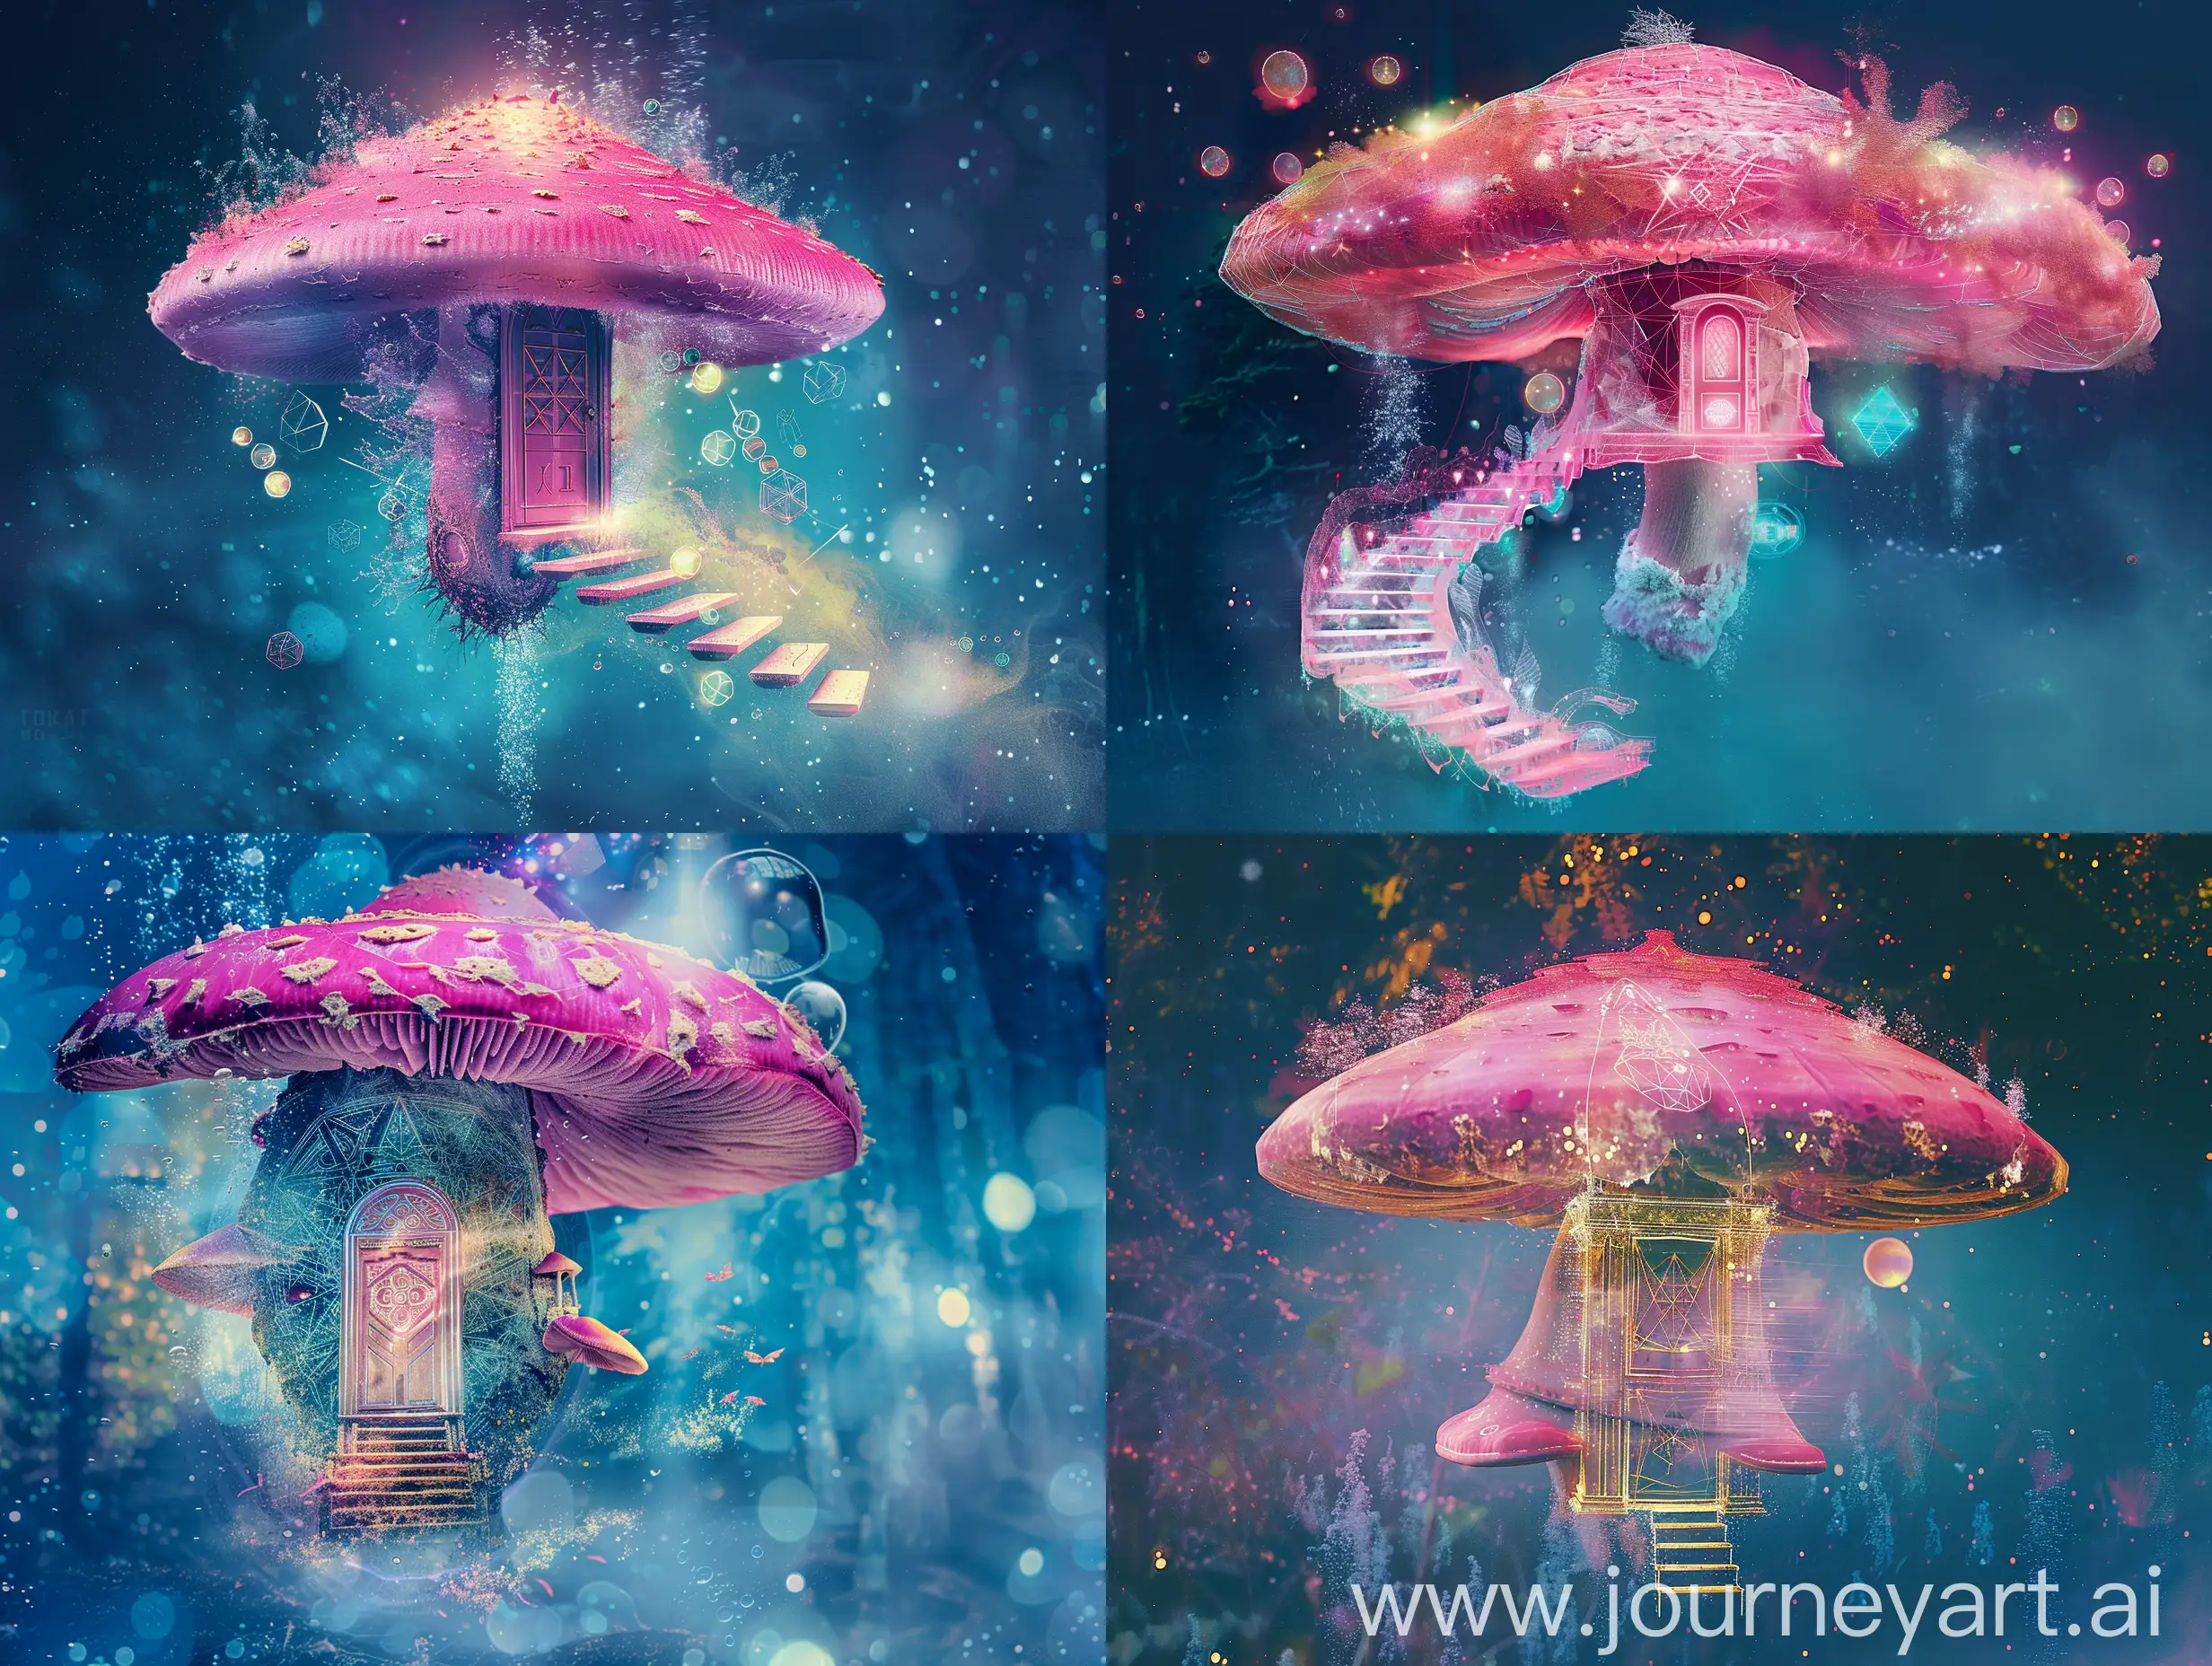 Underwater long exposure photography, a giant pink mushroom with a door and stairs flying in the cosmos with orbs and portals, x-ray style, in the style of Tim Burton, Lion King, the Chronicles of Narnia, Beauty and the Beast, and Peter Pan. with sacred geometric patterns on the body. enchanting aura. The Chronicles of Narnia, Wizard of Oz, and Alice in Wonderland backgroundShow less